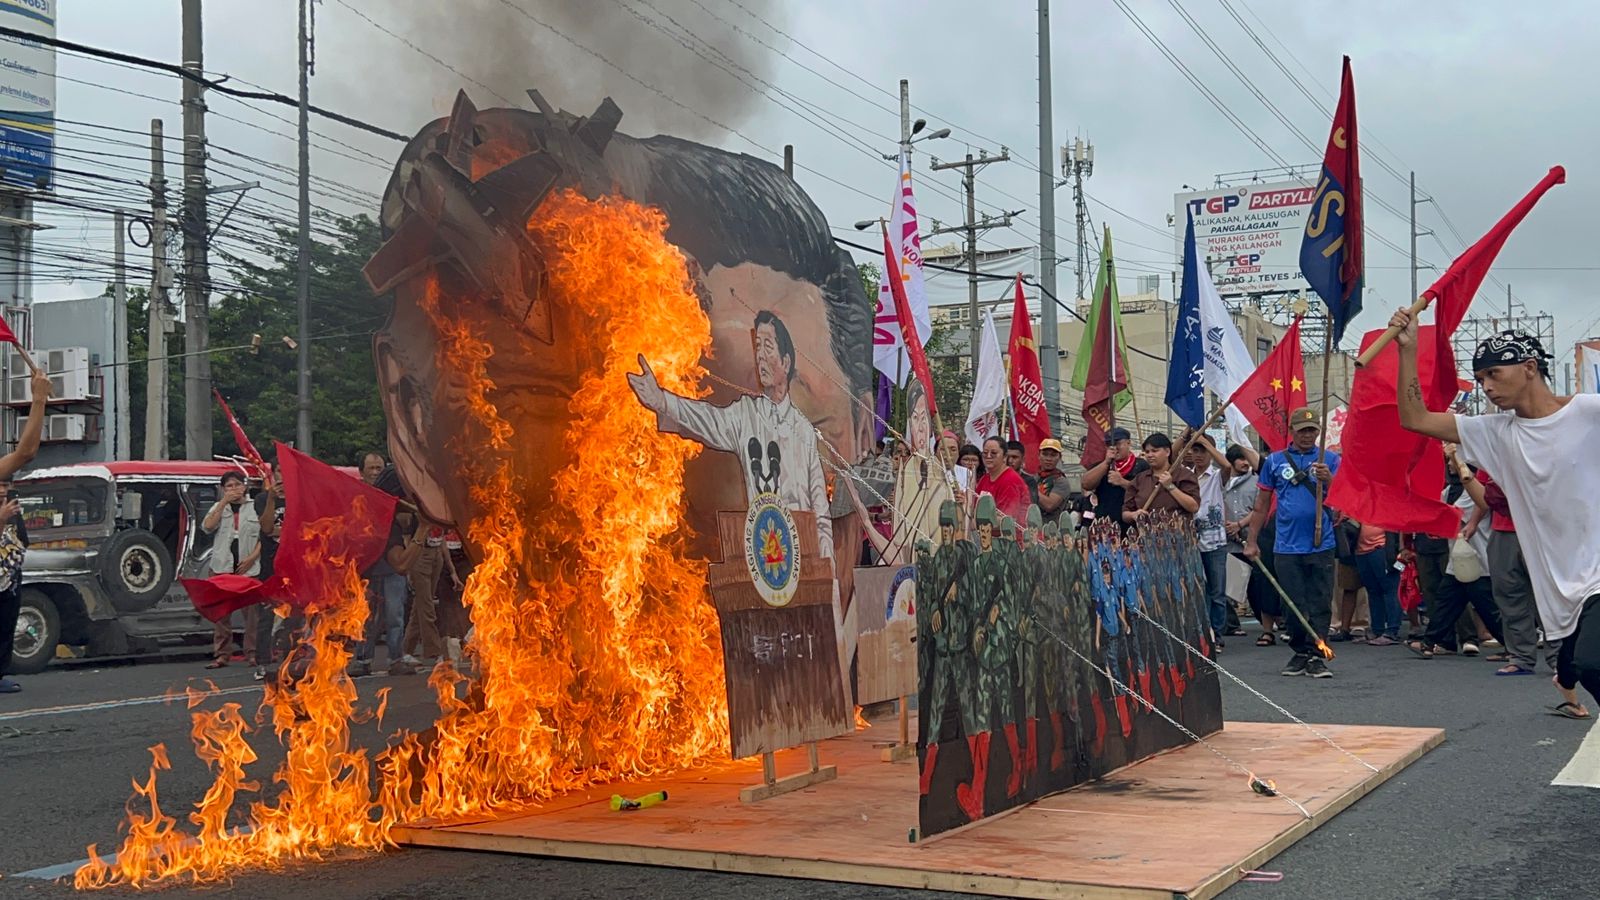 police will enforce the law on the burning of effigies in light of Quezon City Mayor Joy Belmonte’s assurance that there will be no arrests over the activity, according to Metro Manila police chief Major General Jose Melencio Nartatez Jr. 